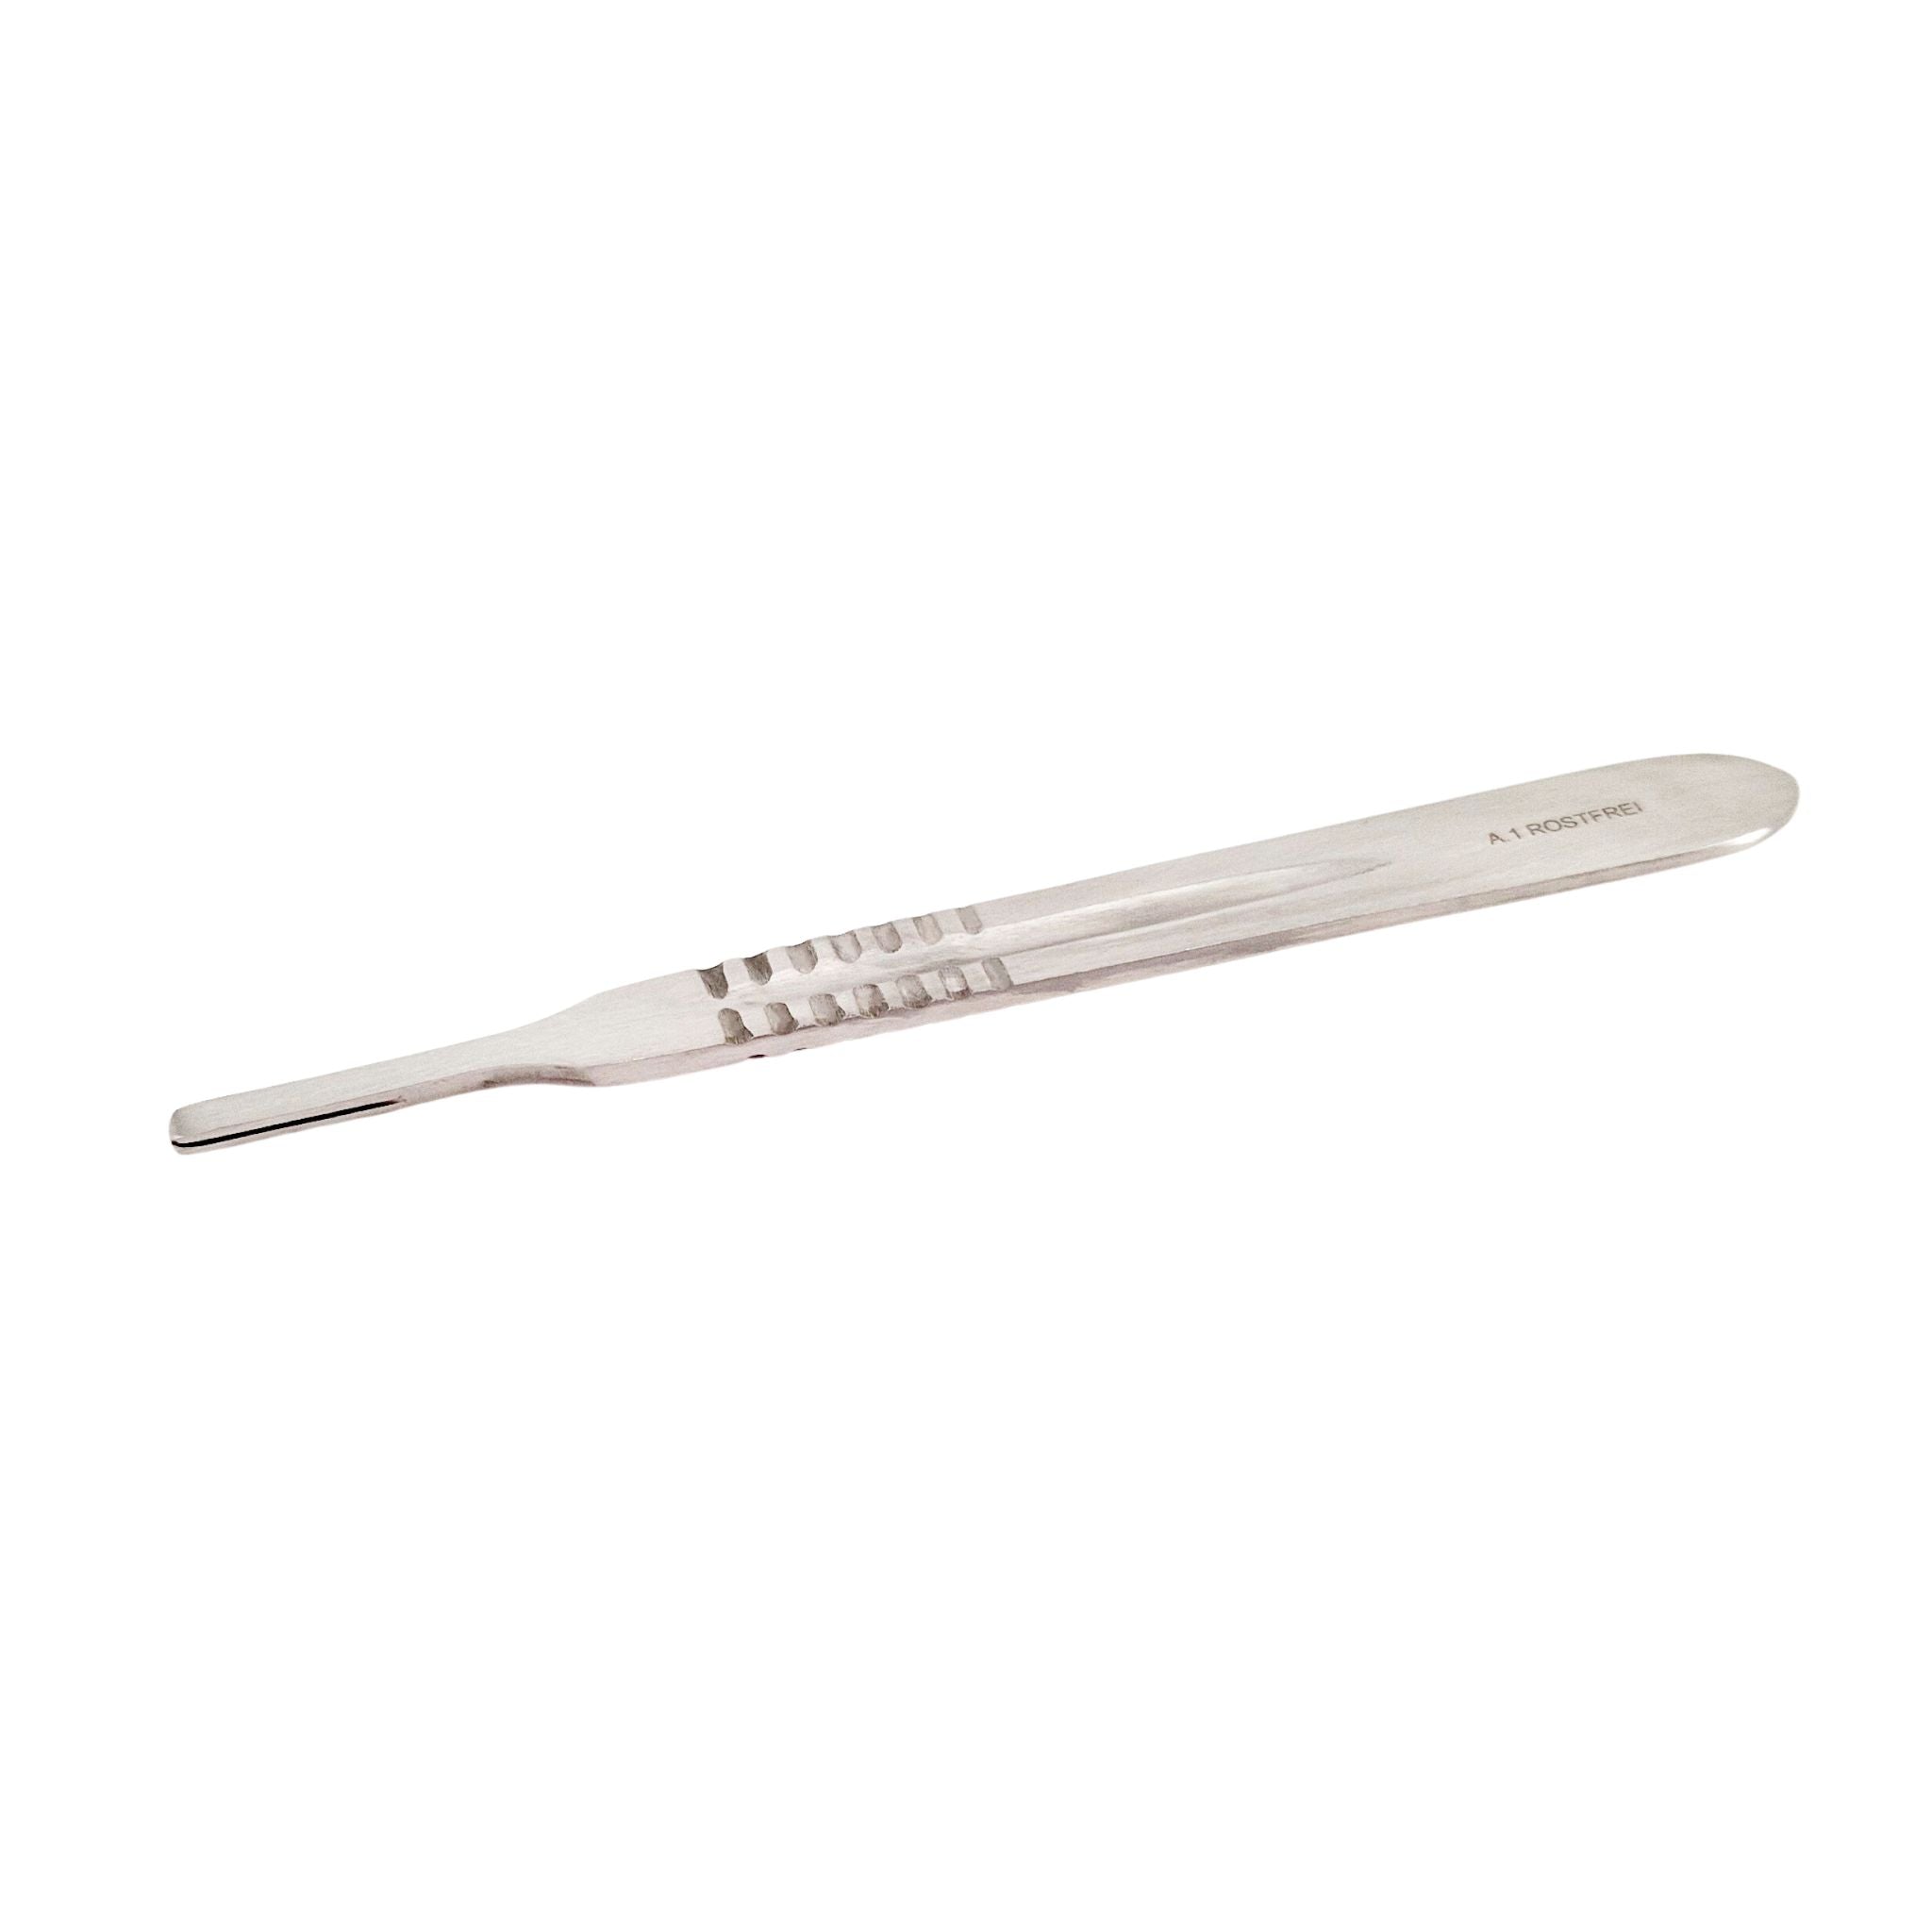 Lavabis scalpel handle size 4 stainless steel